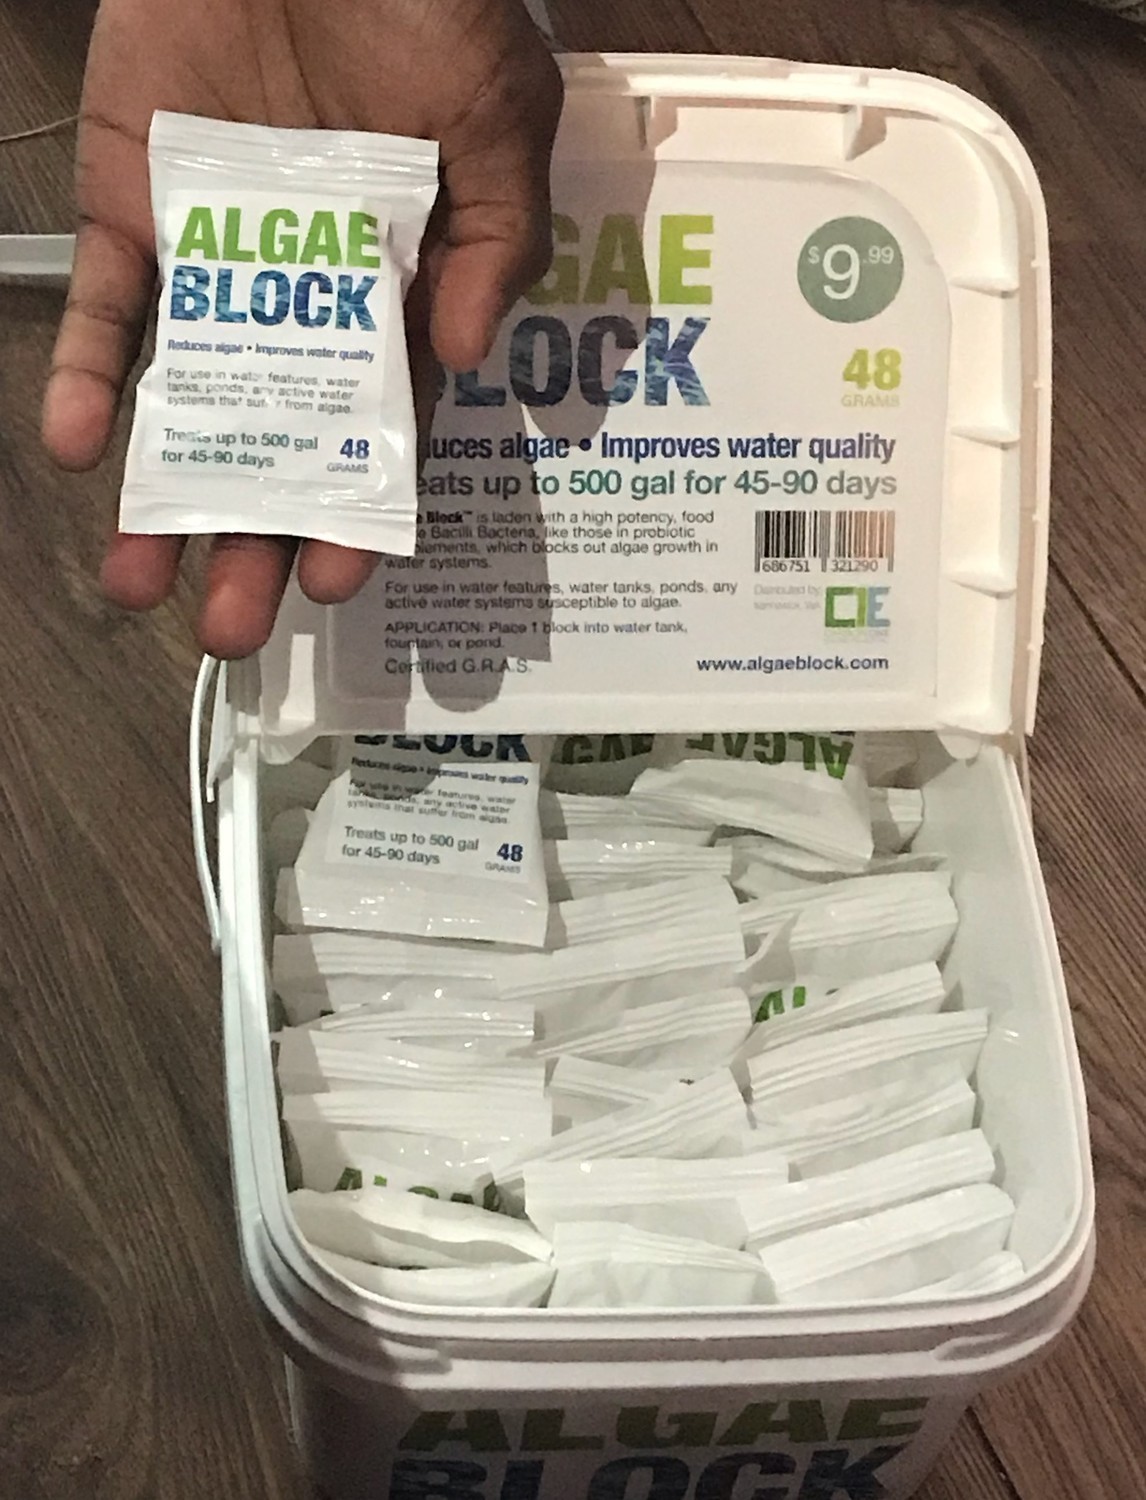 LGAE BLOCK 48 GRAMS
TREATS UP TO 500 GALLONS FOR 45-90 DAYS